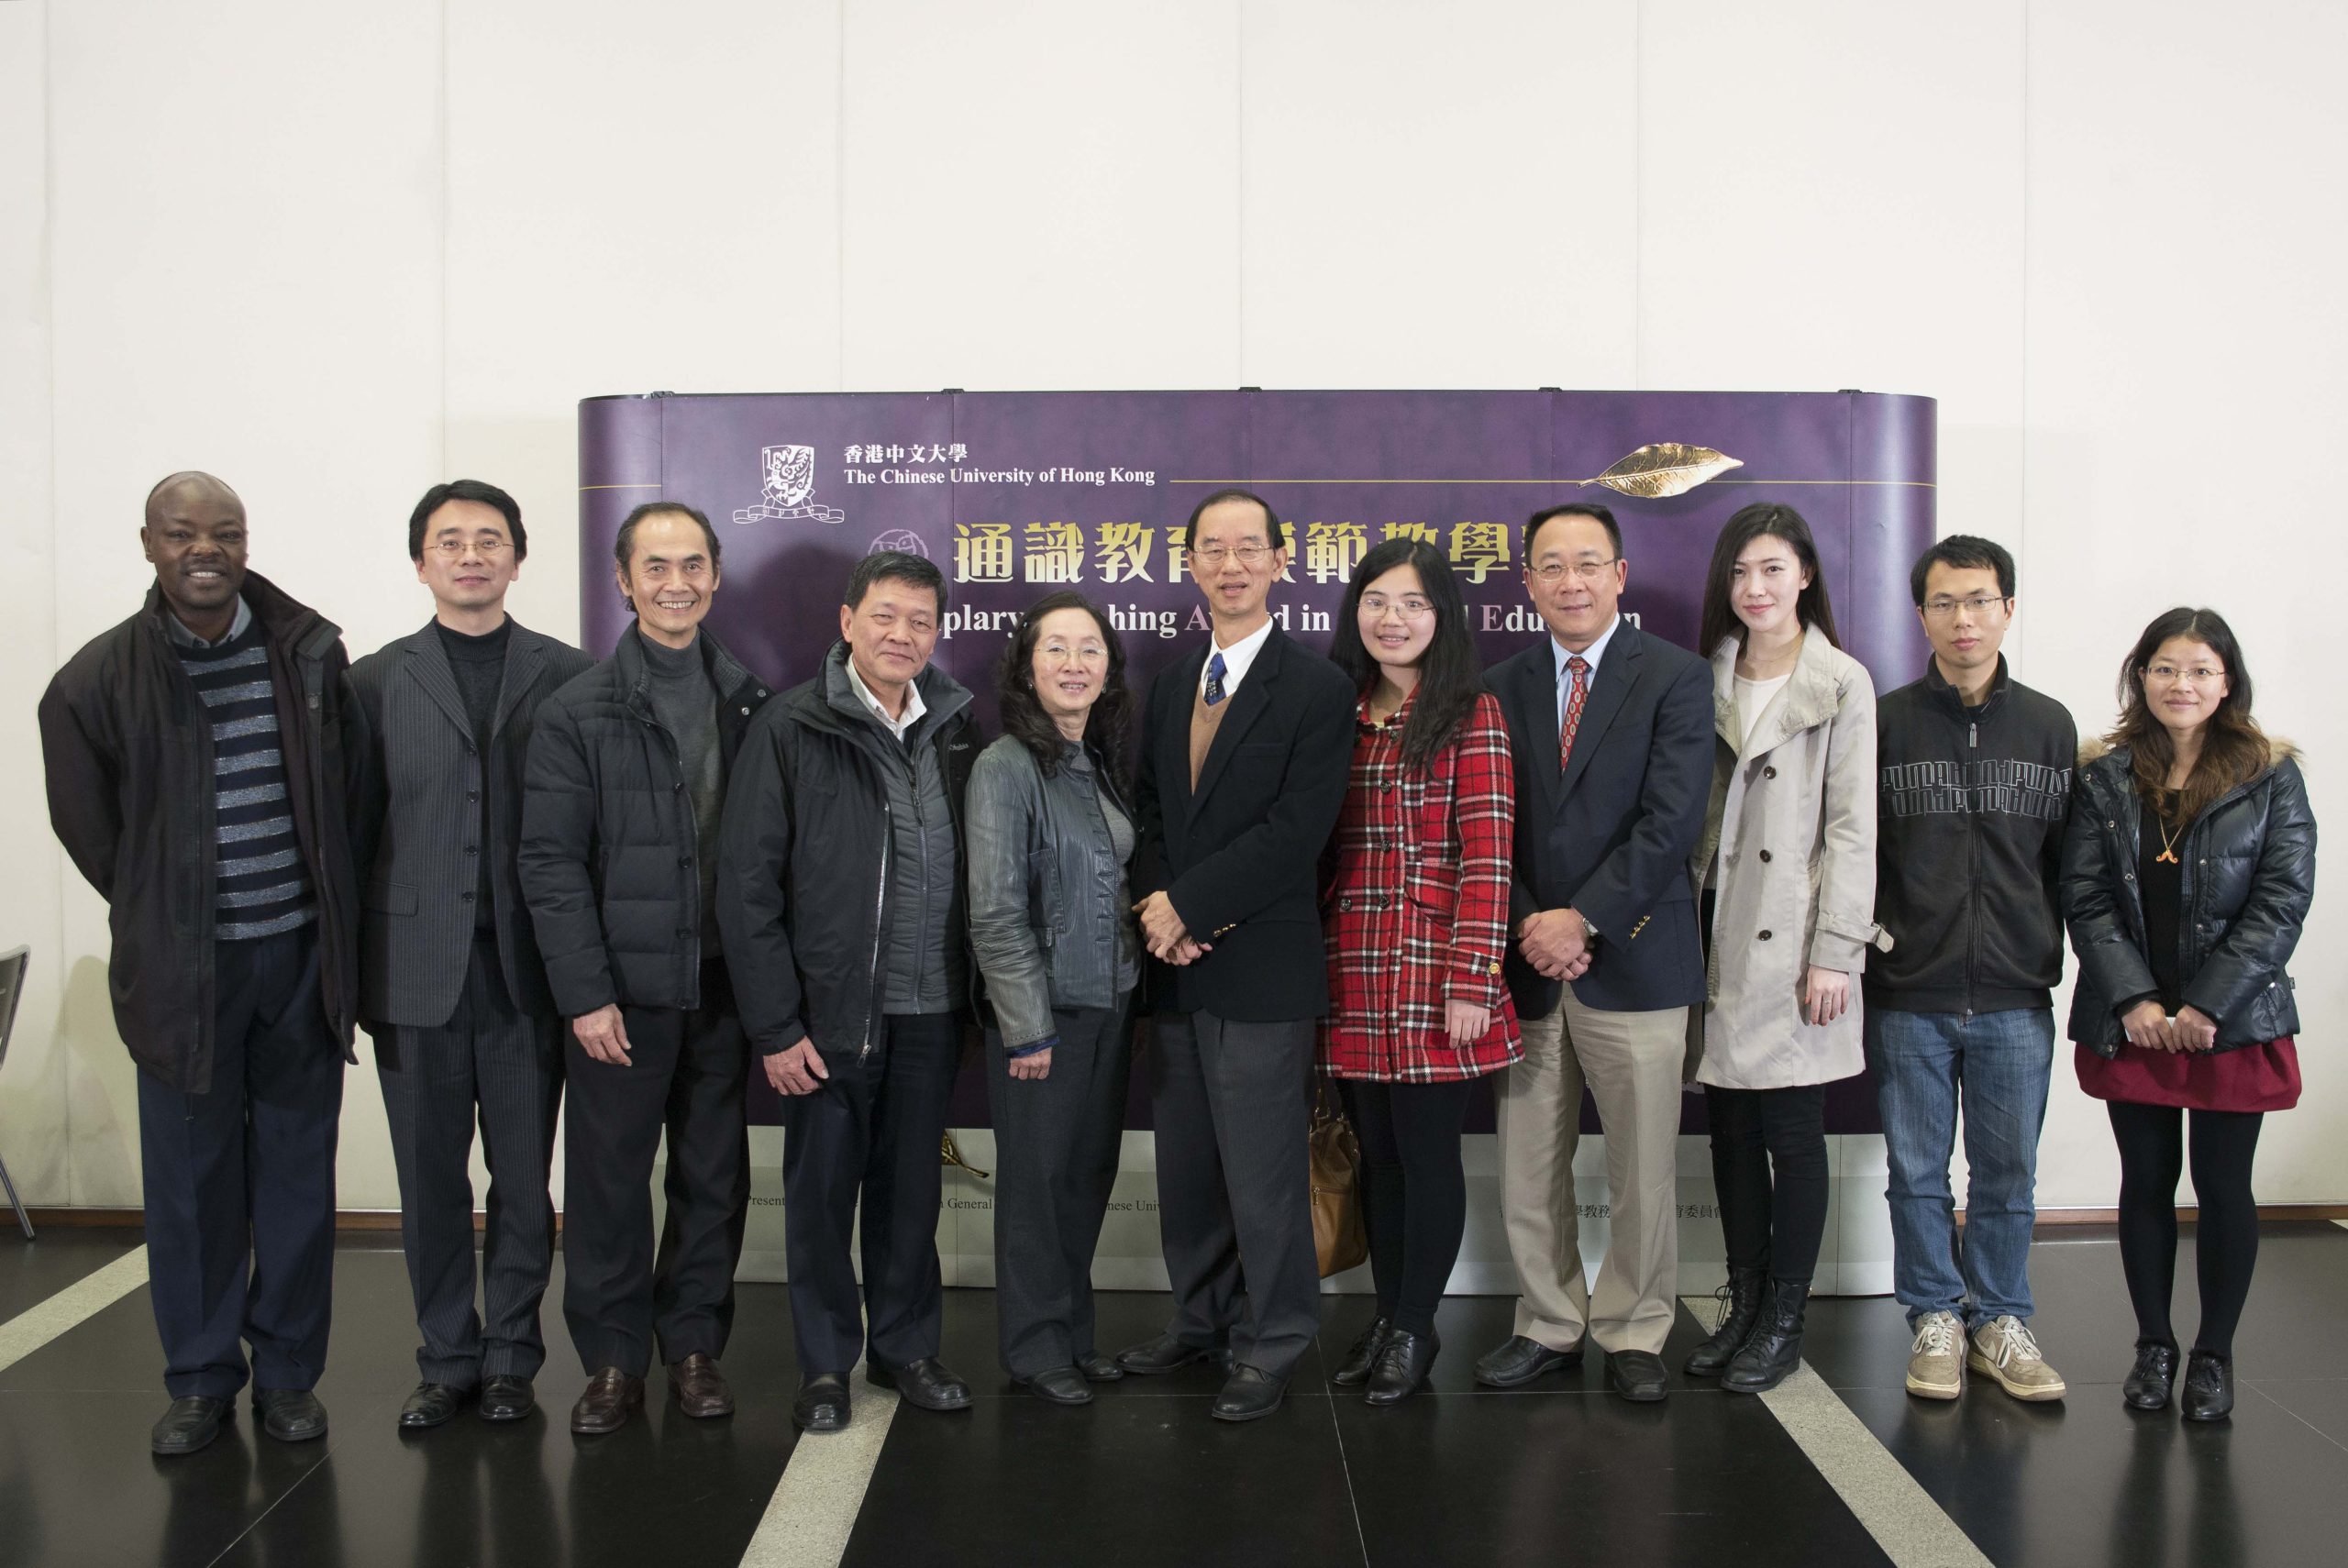 Prof. Lam Chiu Ying and his wife, colleagues and students